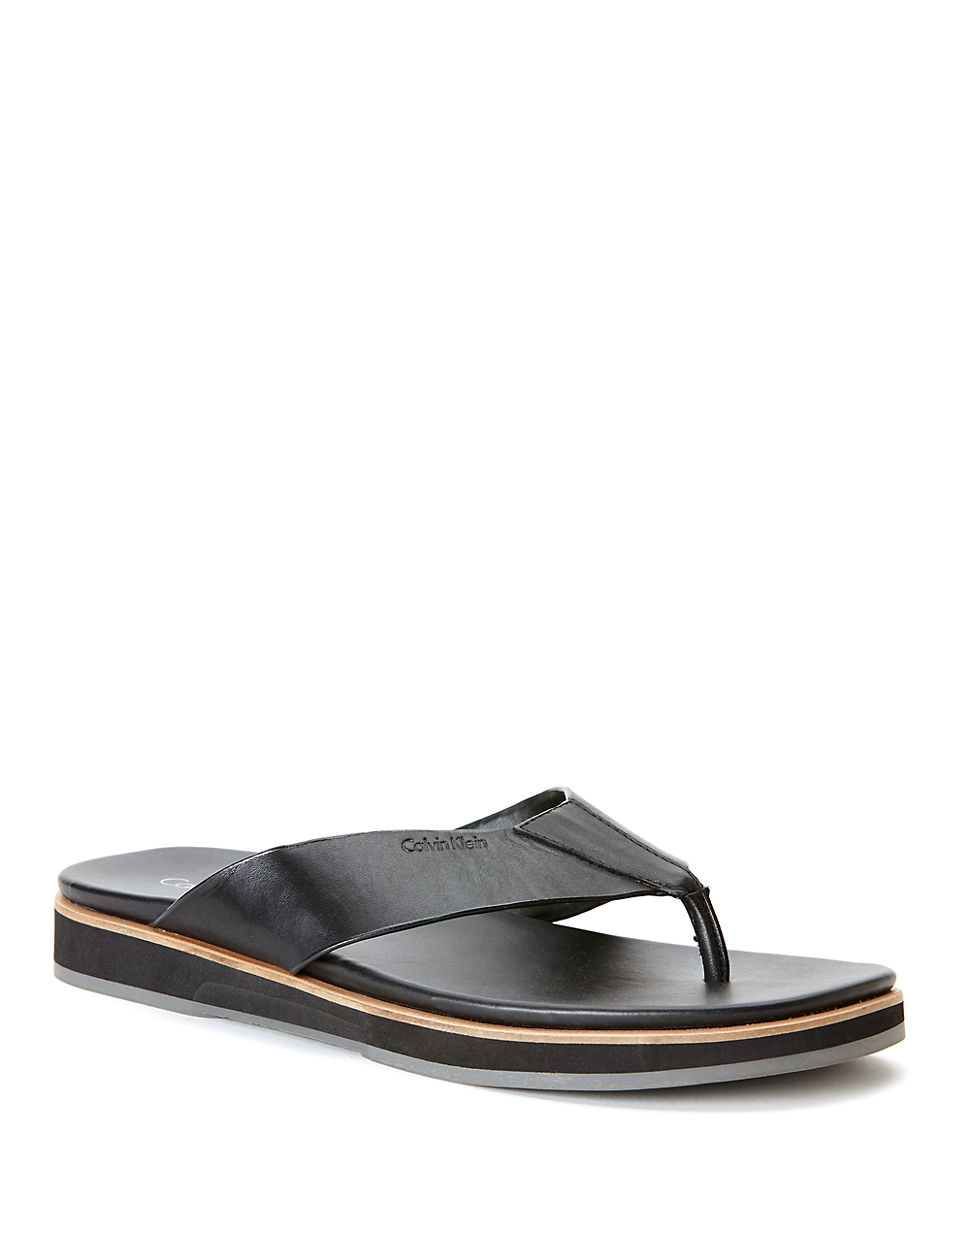 Calvin klein Deano Leather Thong Sandals in Black for Men | Lyst